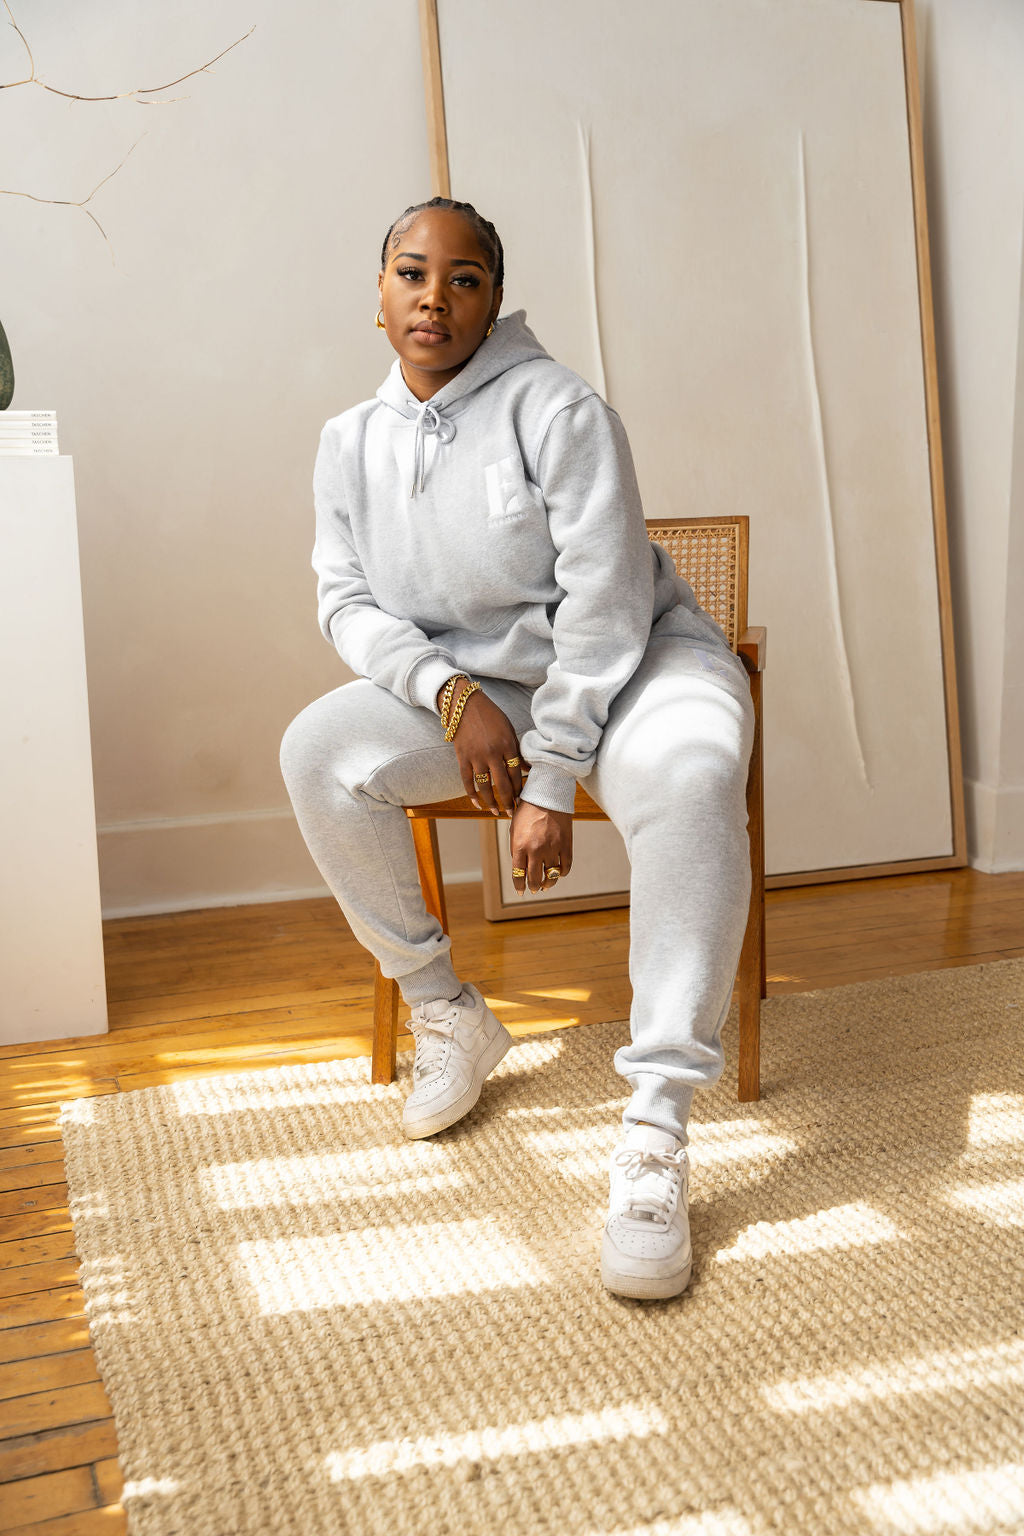 Model sitting on a chair wearing a light grey sweat suit. She is also wearing white sneakers. The sweat suit has the E's Element imprinted in white. The model is also wearing white sneakers. Woman wearing grey hoodie and sweatpants.